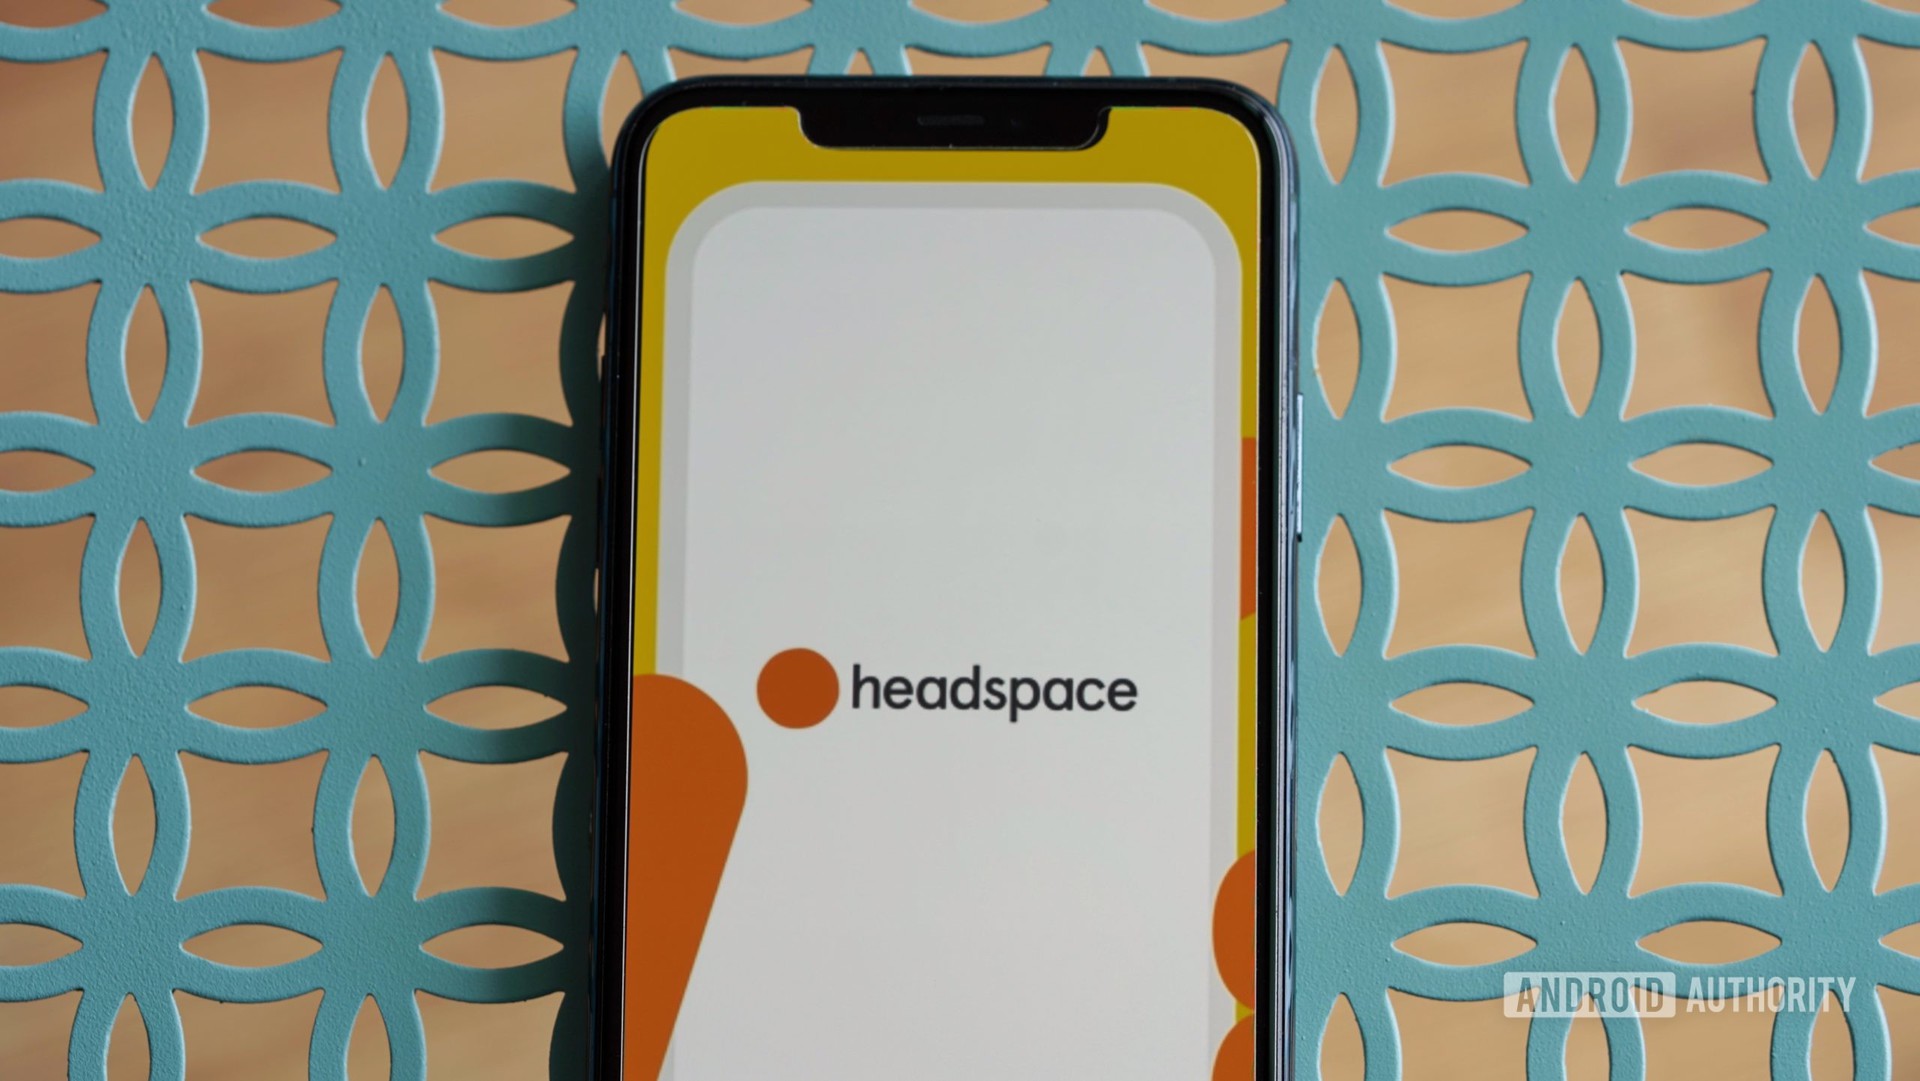 An iPhone 11 rests on a teal metal table, displaying the Headspace app logo.